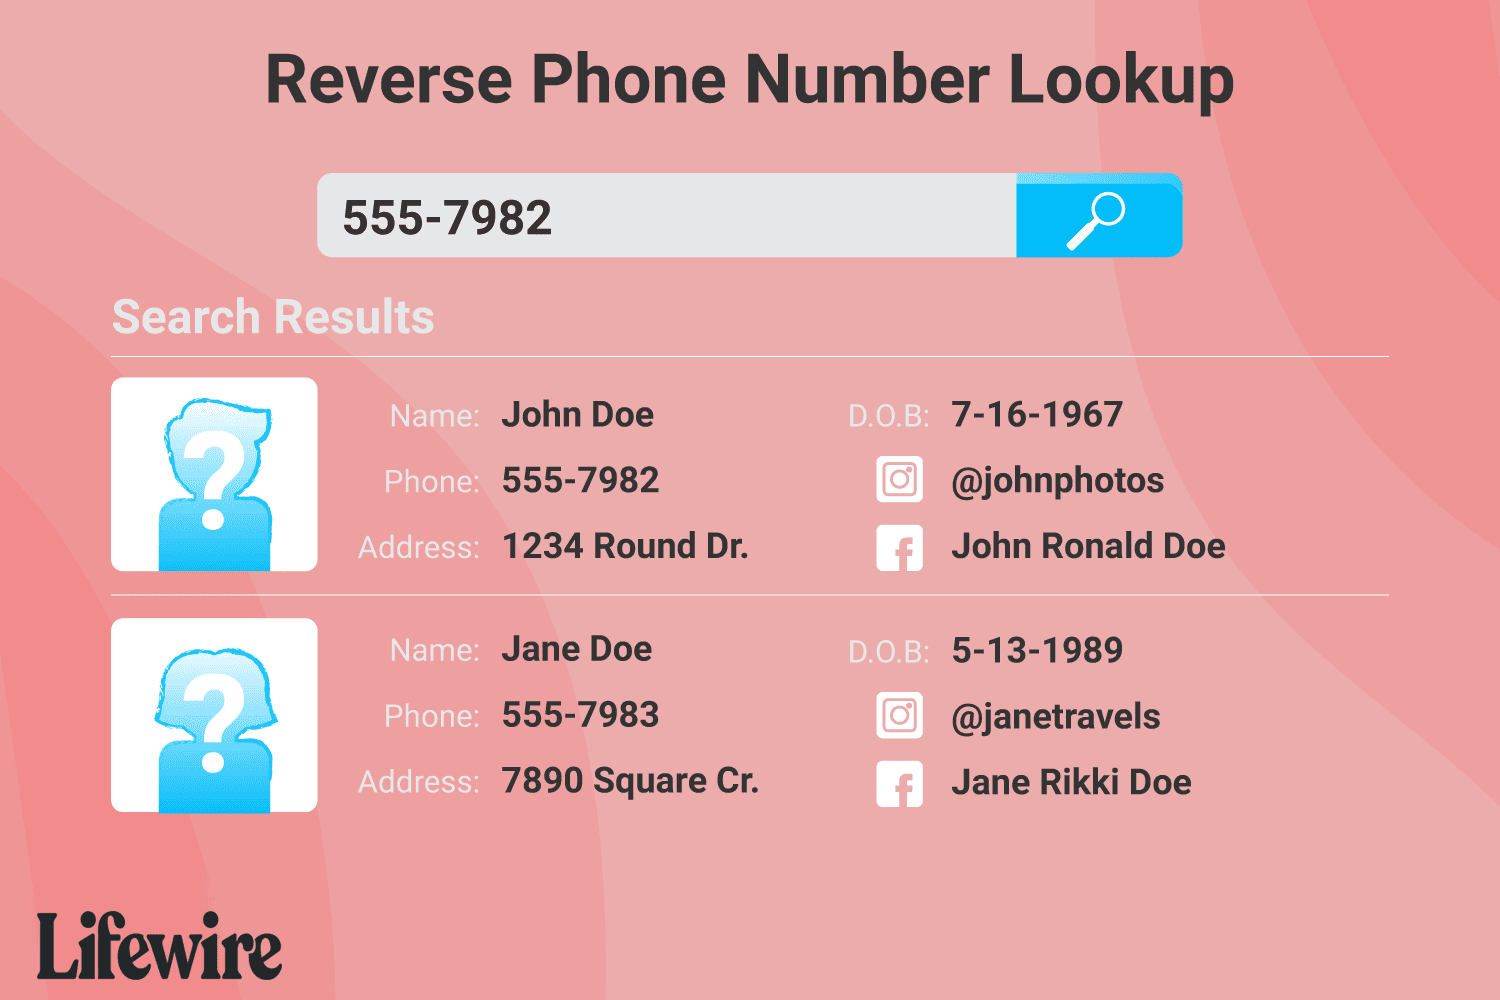 phone number reverse search